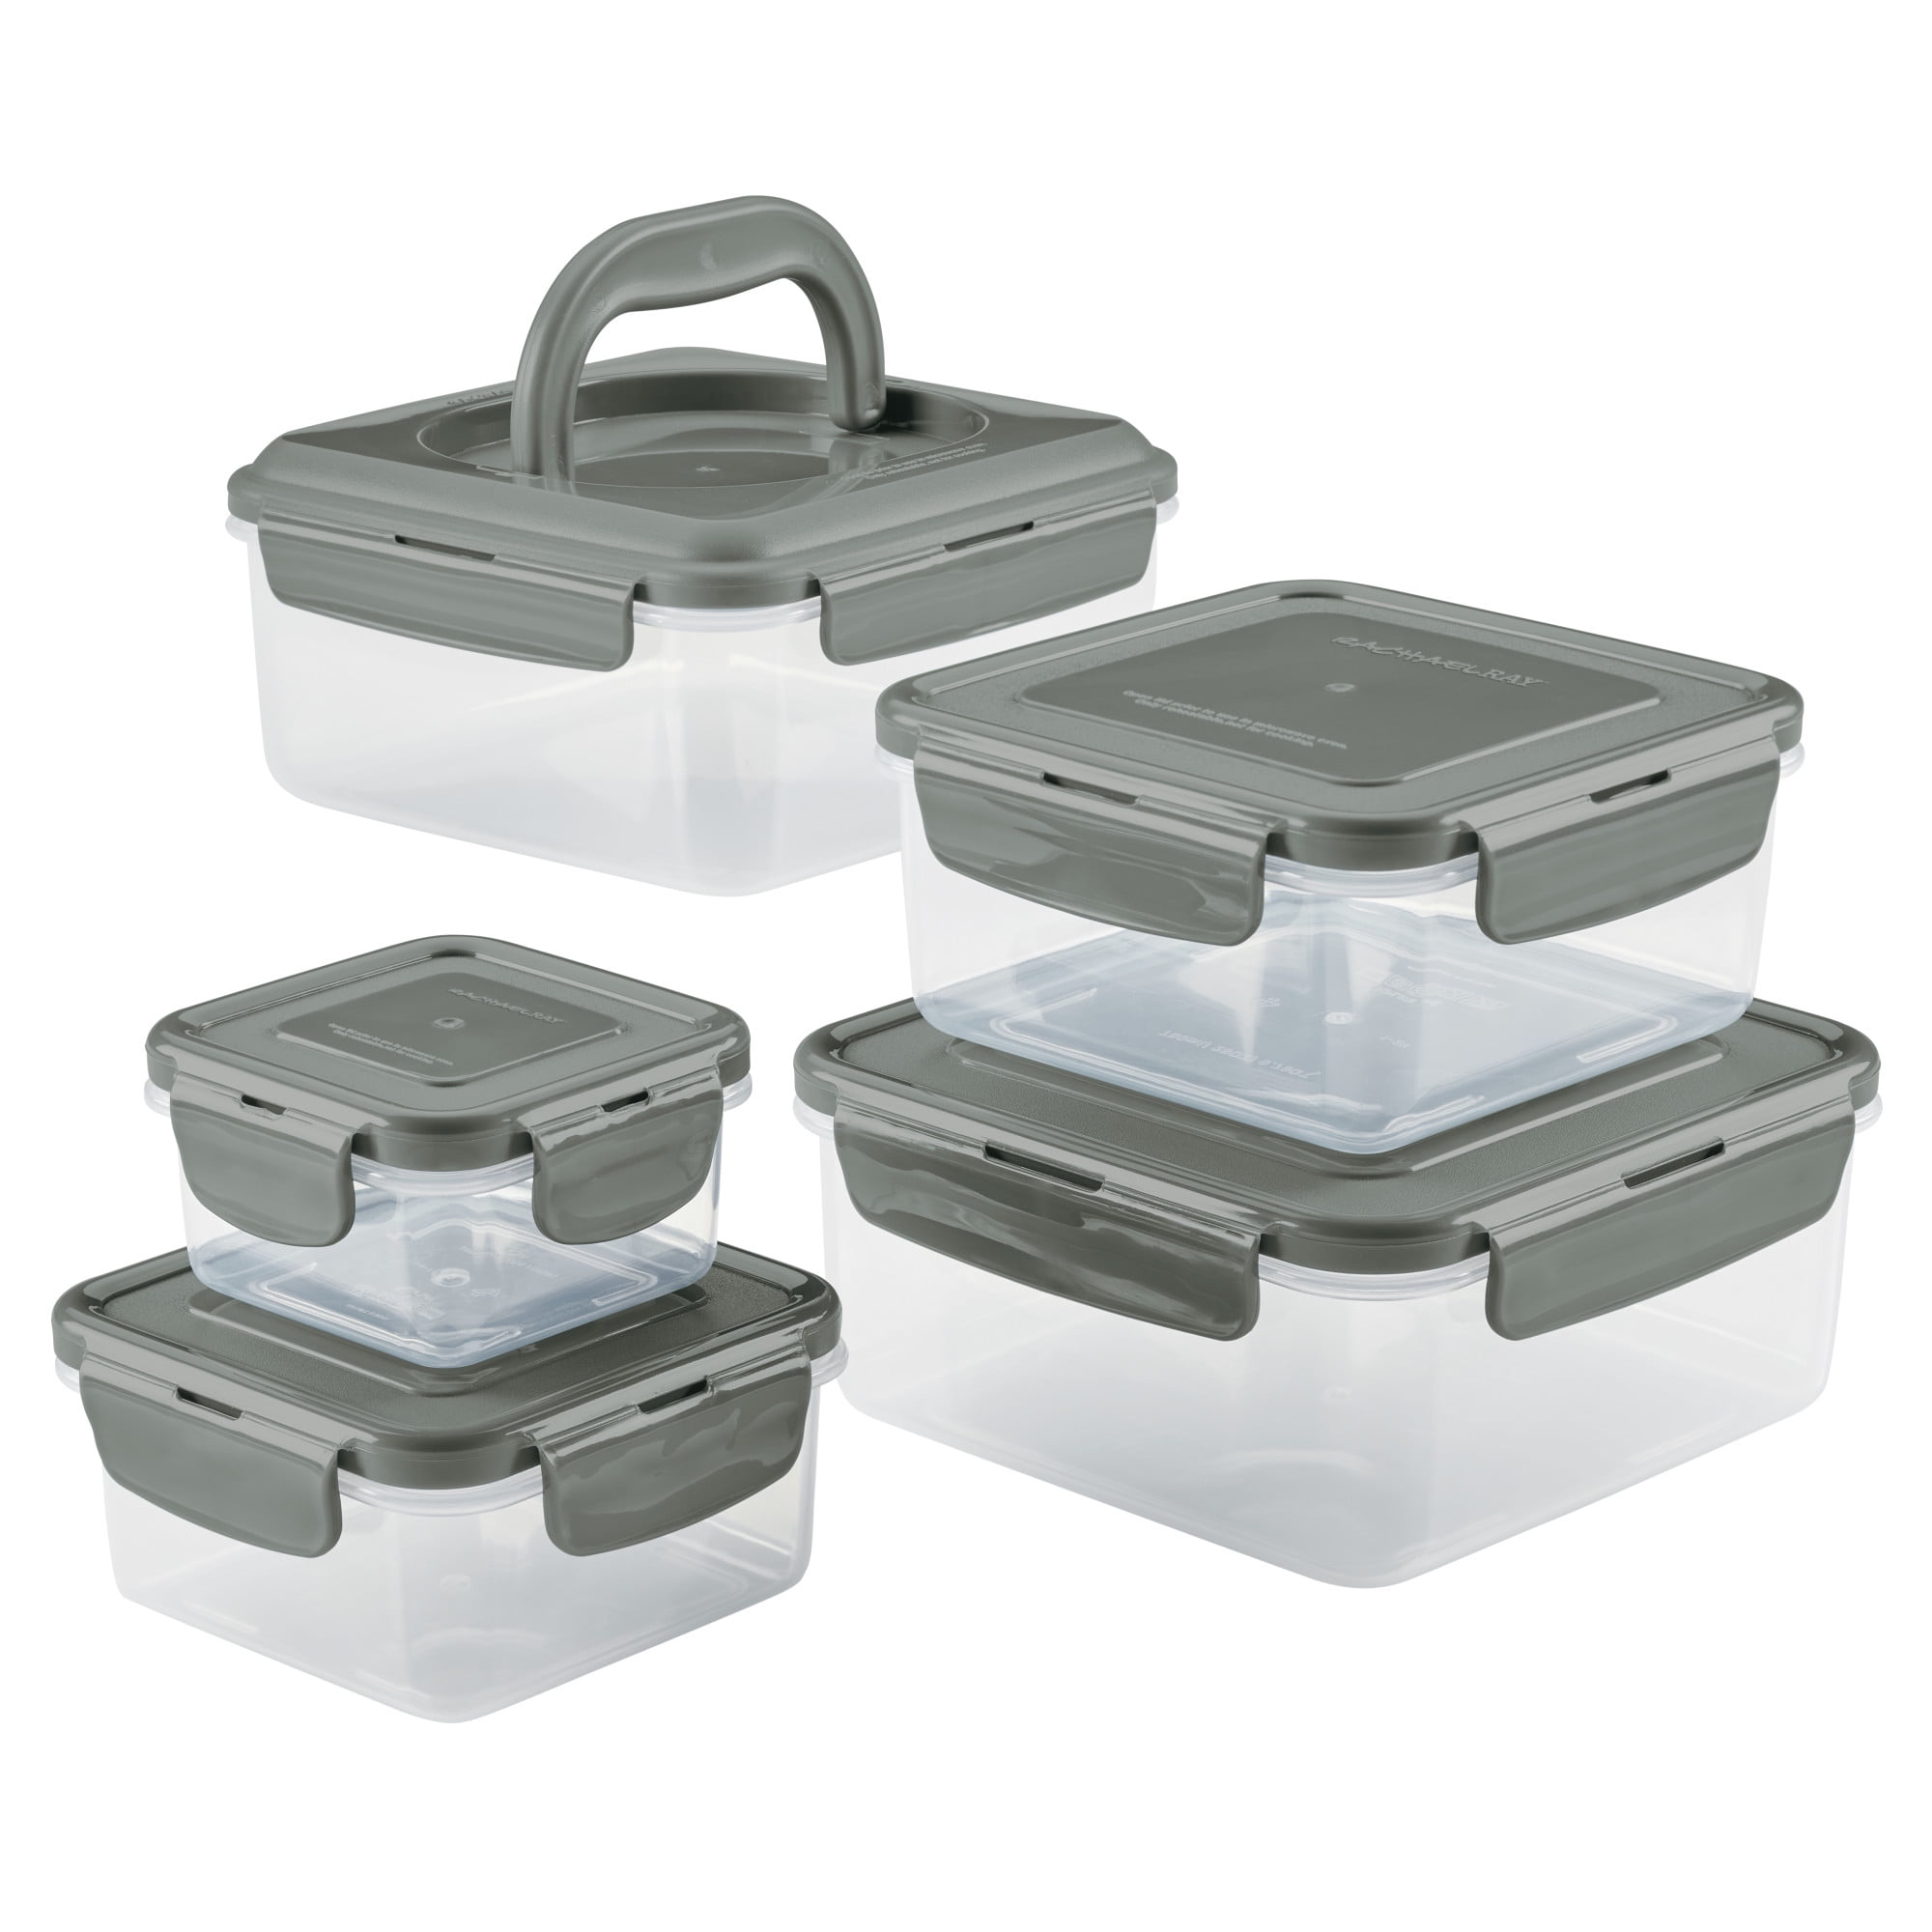 Nuanchu 10 Pcs Stainless Steel Food Storage Containers with Lids Metal Meal  Prep Containers Rectangular Bento Lunch Box Set Leak Proof Airtight for